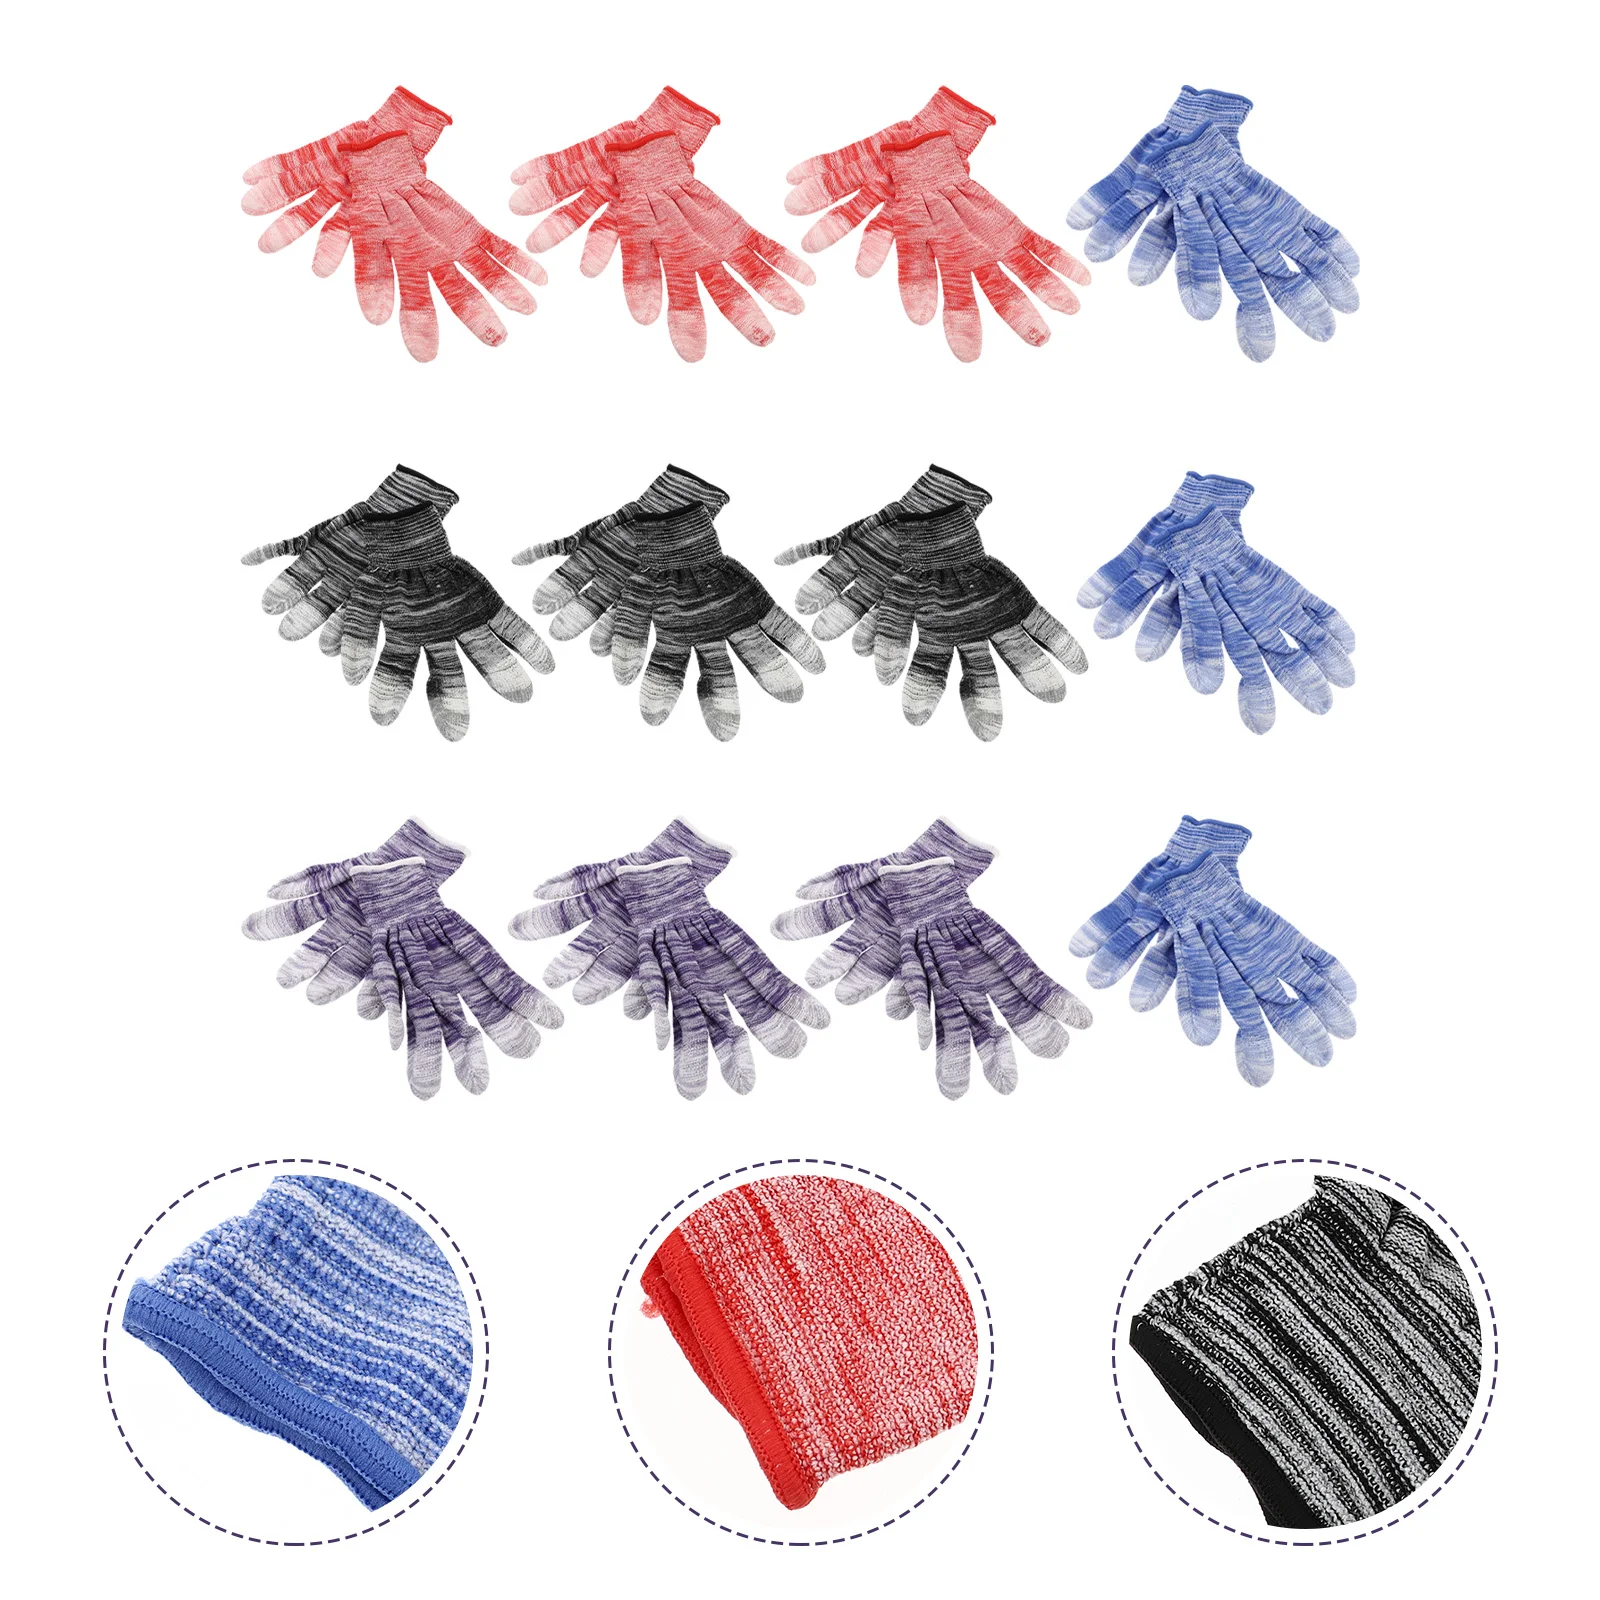 

12 Pairs Painted Finger Sewing Gloves Protective Mitten Fingers Non-skid Nylon Anti-static Work